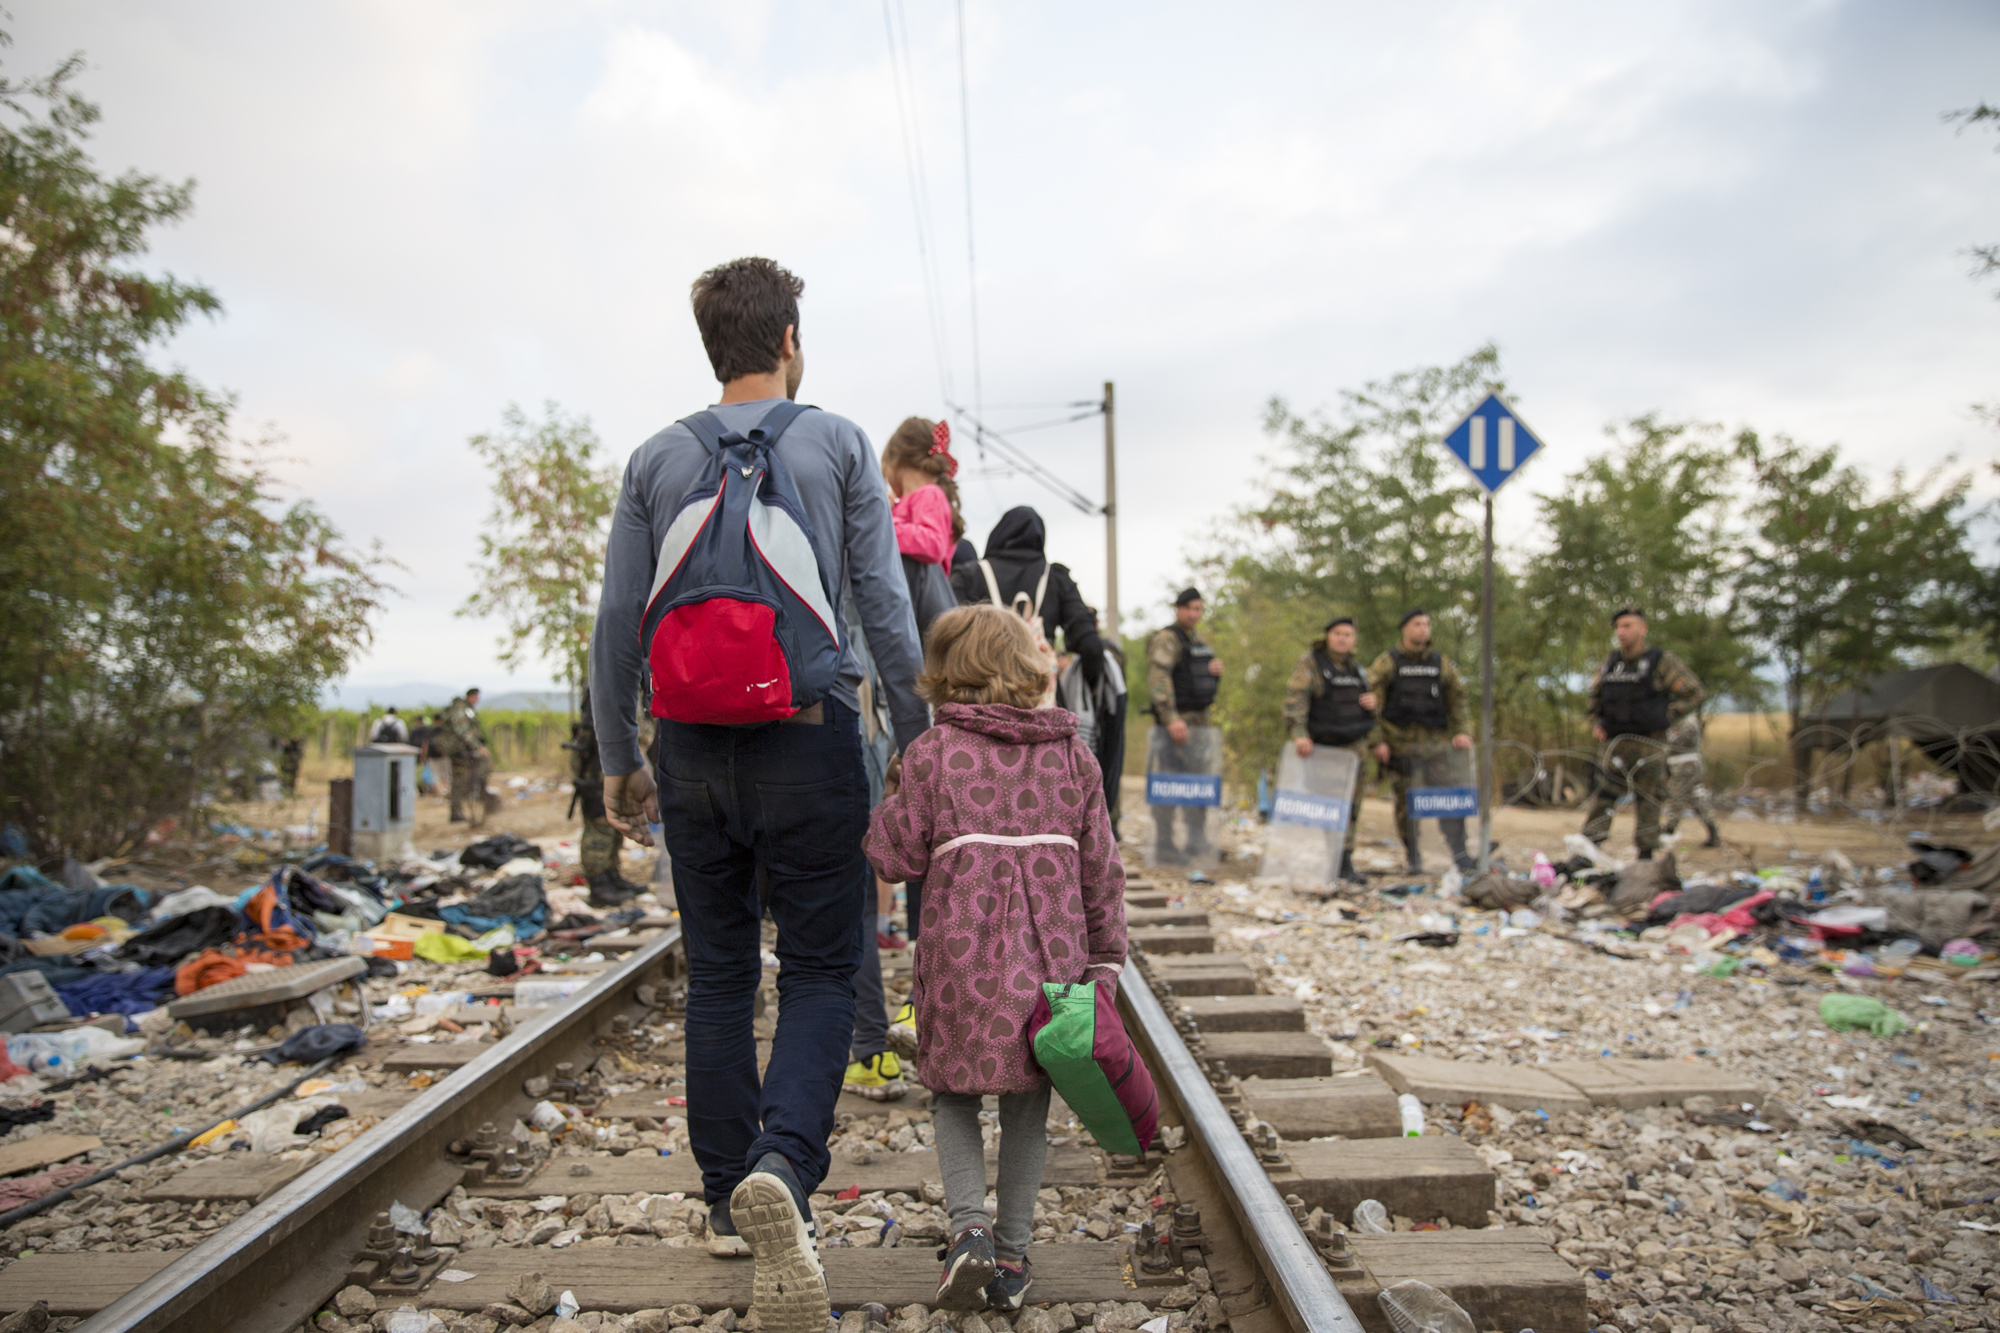 Refugees and migrants cross the border from Greece into Macedonia, 24 August 2015.